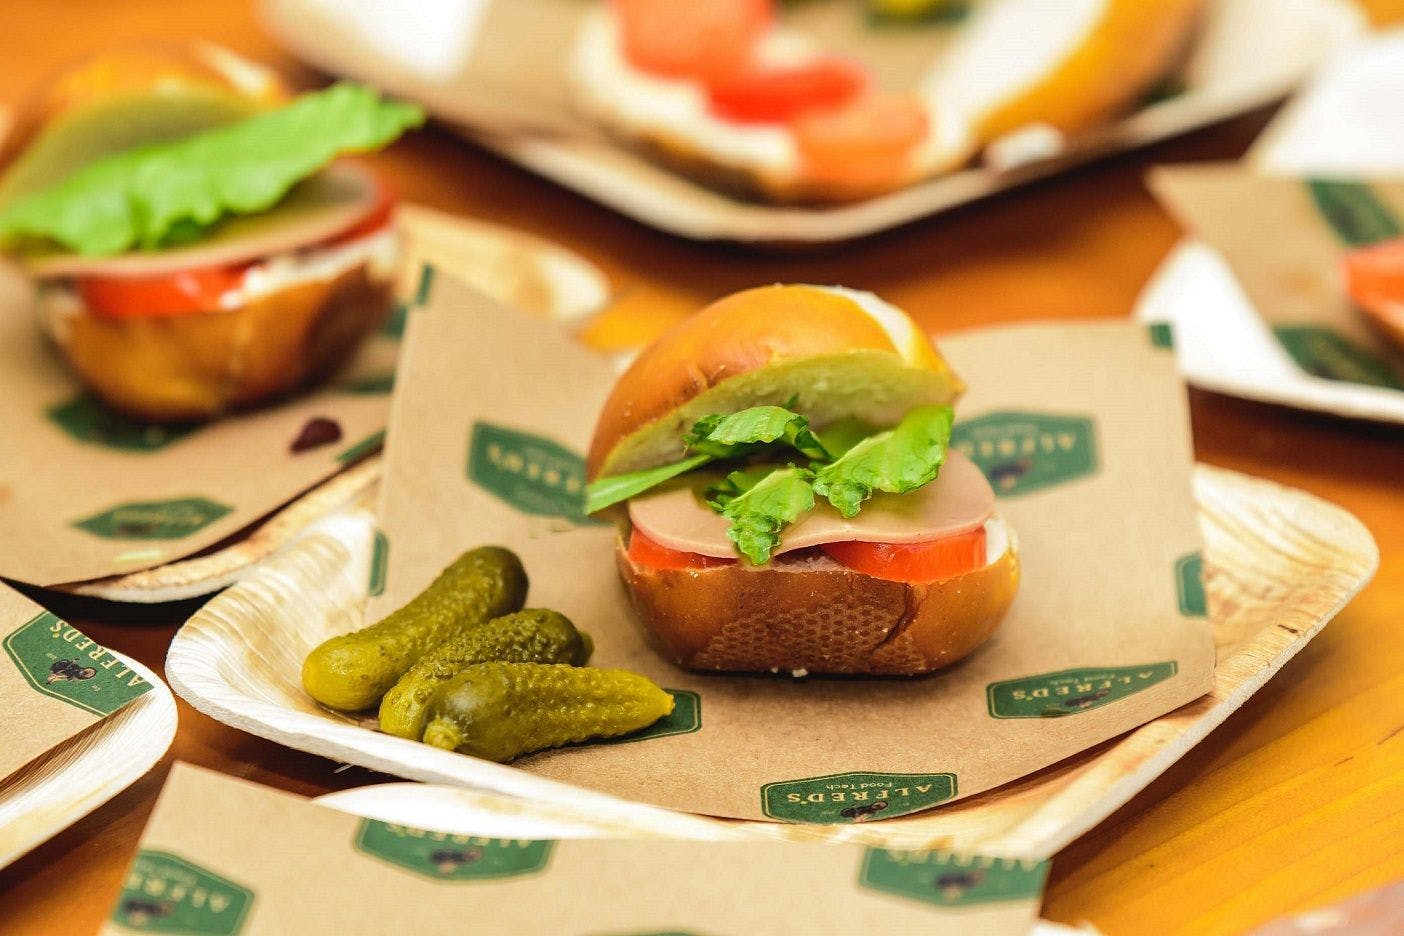 Alfred’s FoodTech creates plant-free deli meat, chicken nuggets